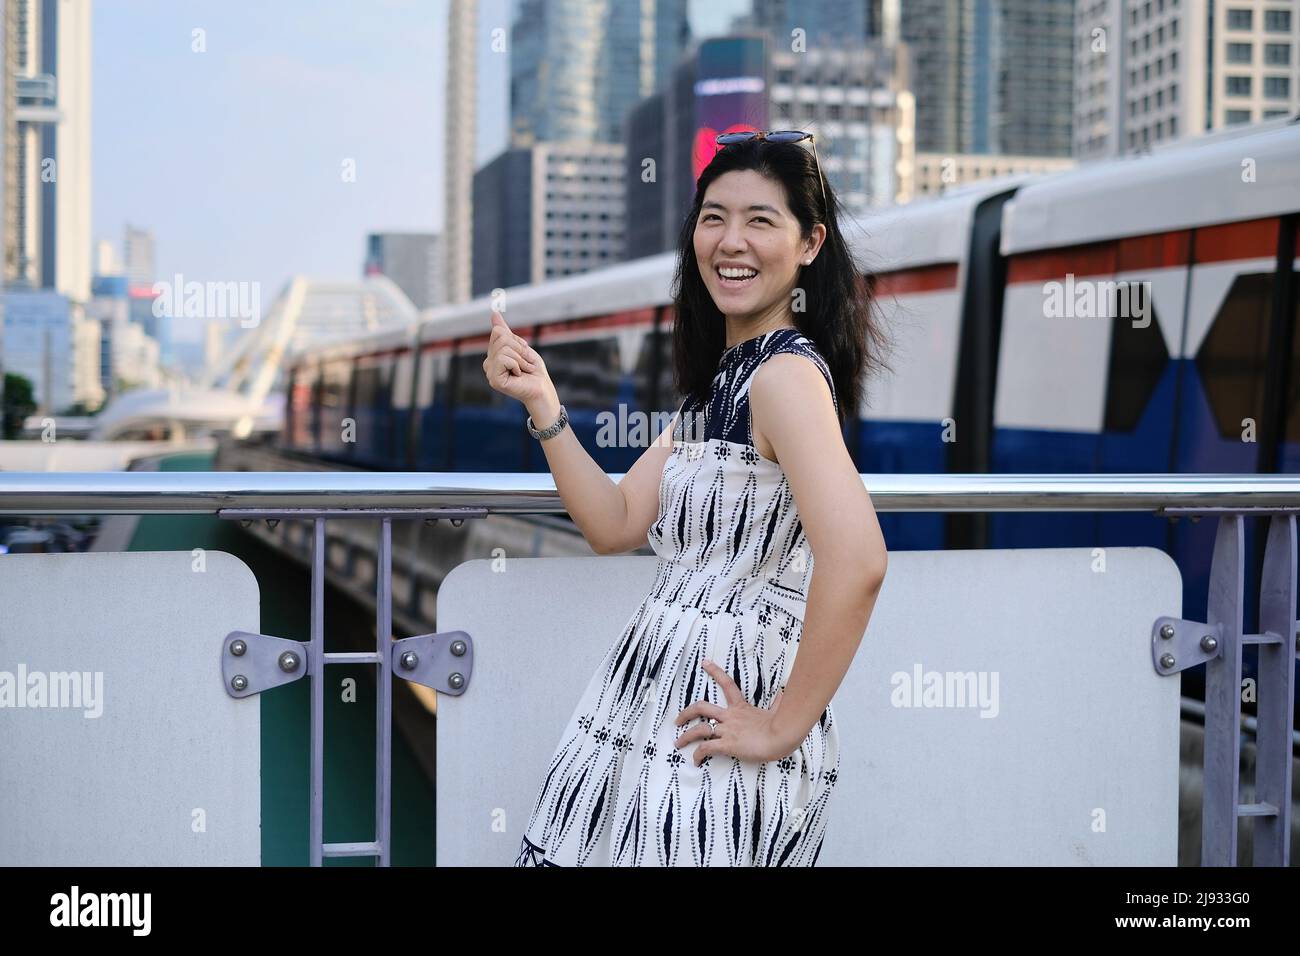 An Asian woman is standing on a platform at a sky train station, feeling happy and smiling with the incoming train arriving in the background. Stock Photo